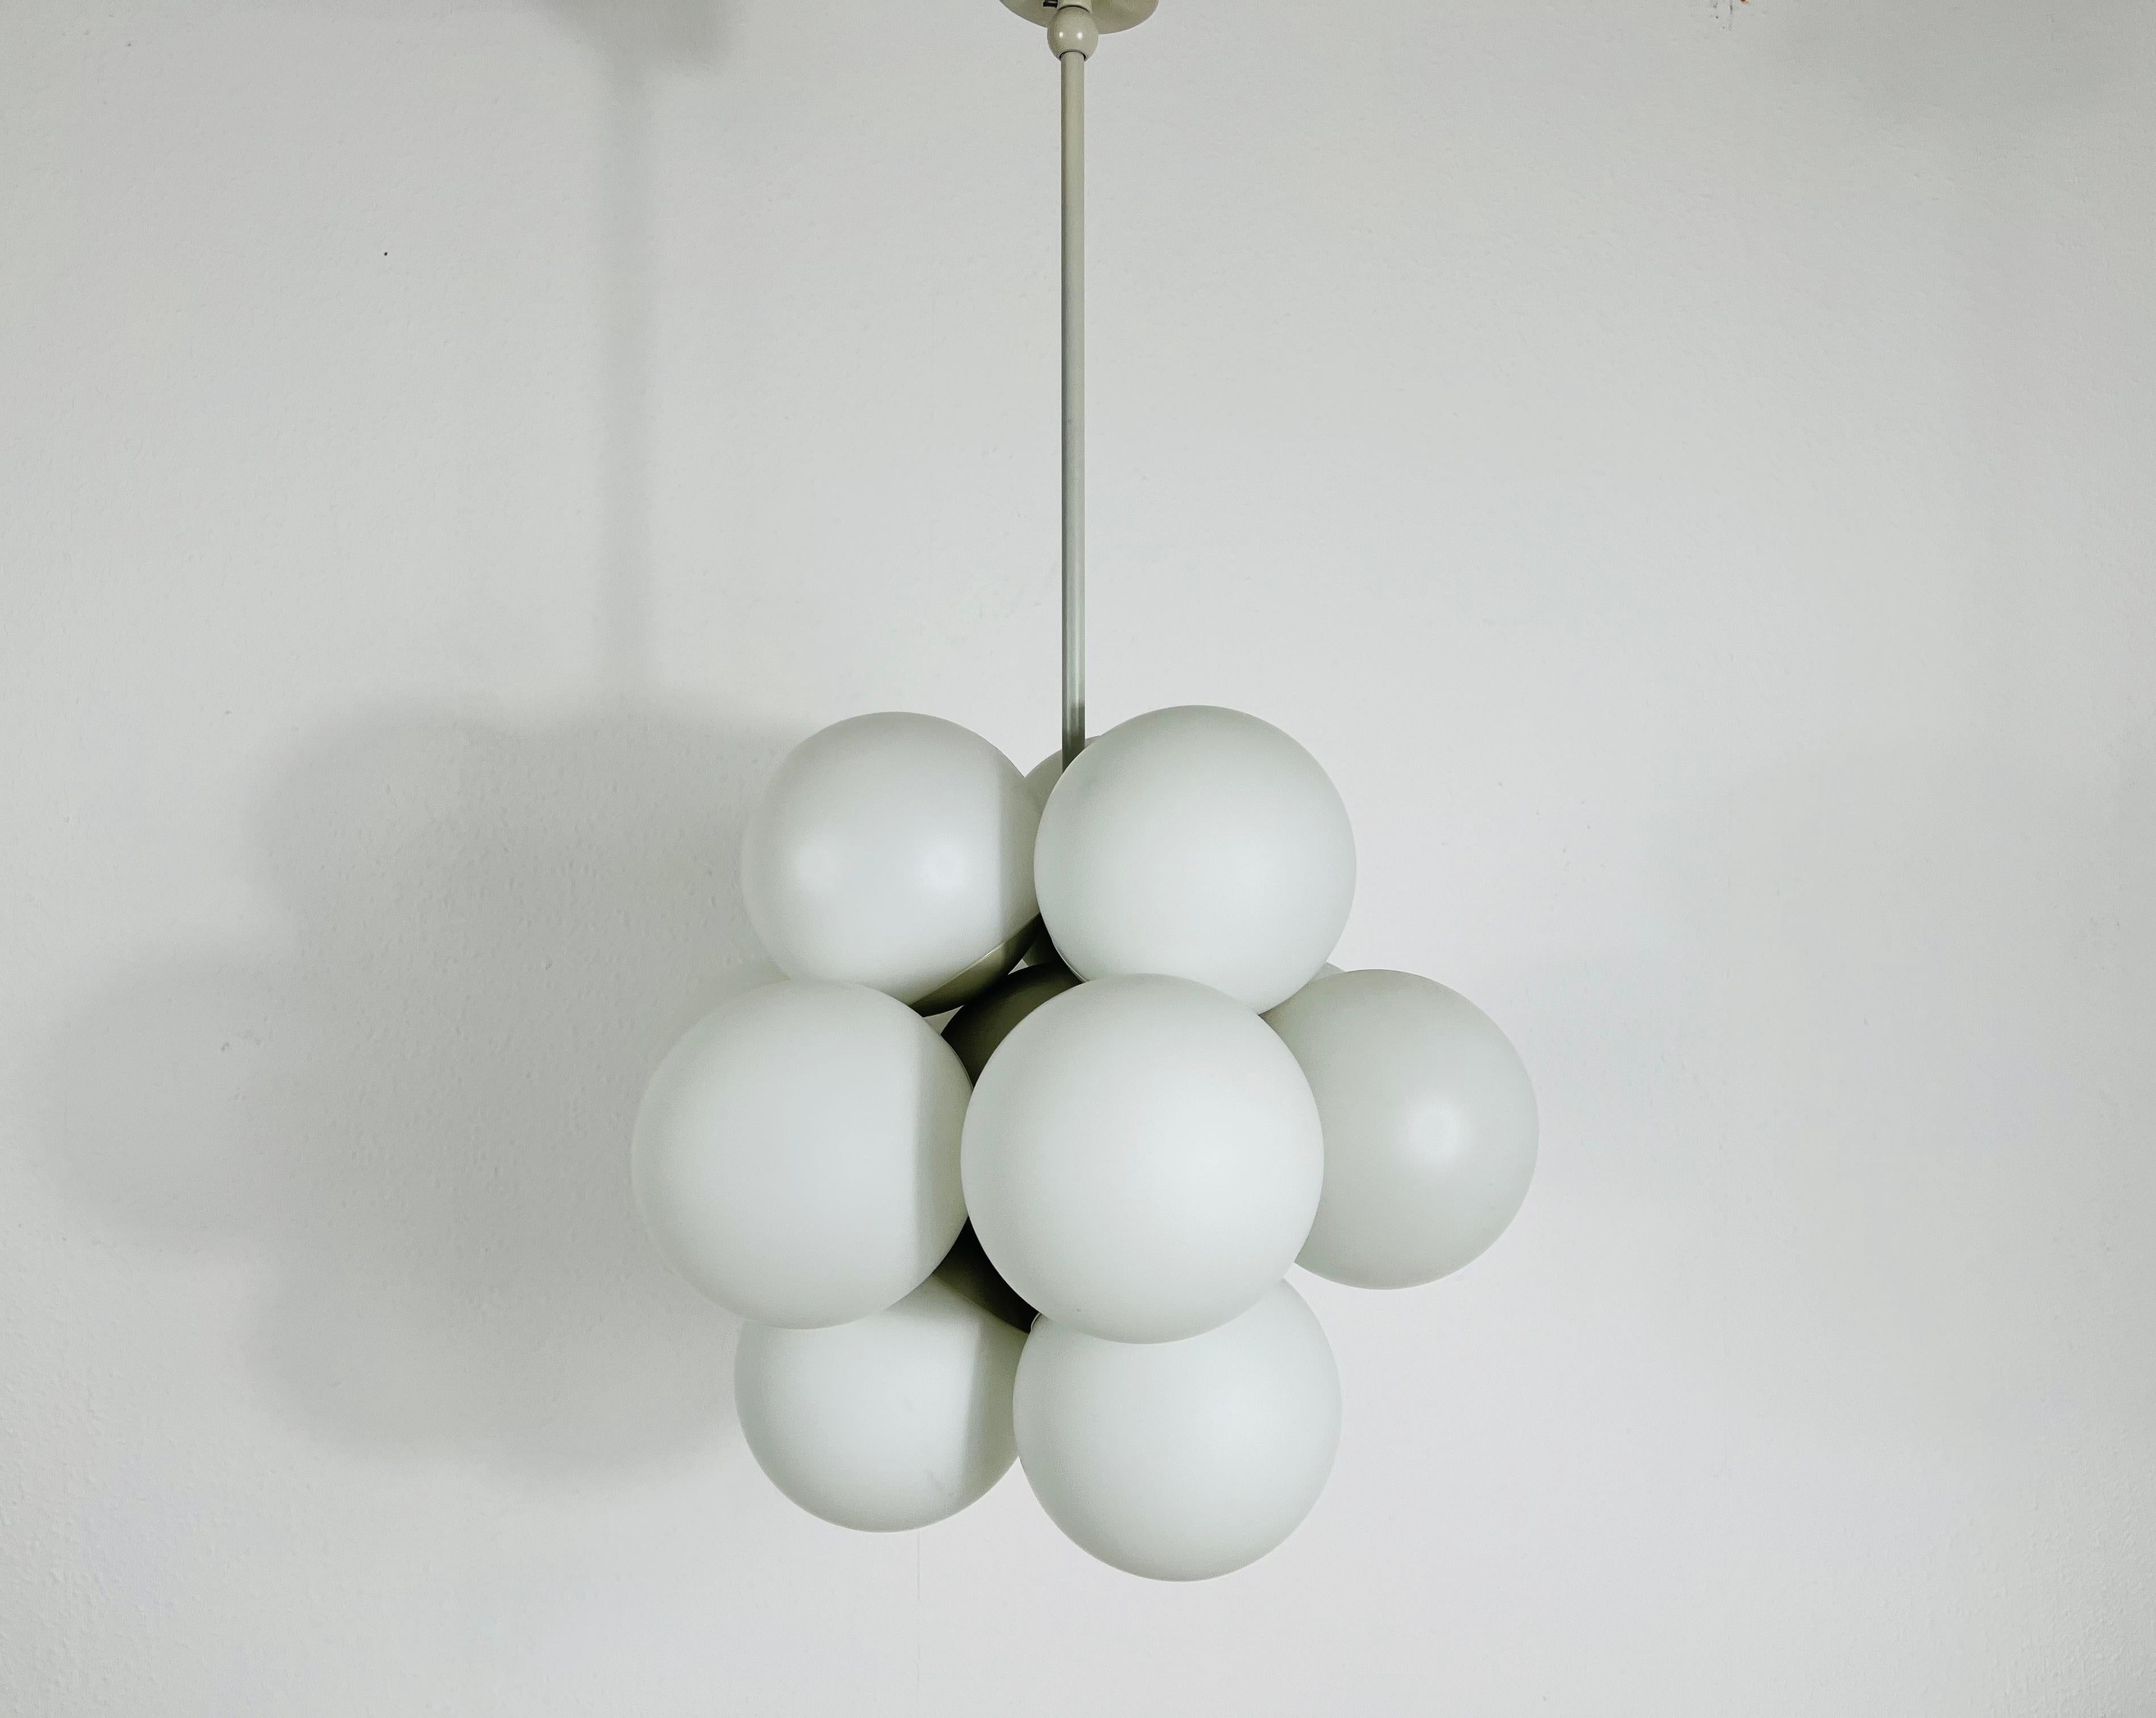 A midcentury chandelier by Kaiser made in Germany in the 1960s. It is fascinating with its Space Age design and twelve opaque balls. The white circular body of the light is made of full metal, including the arms. White bar with white